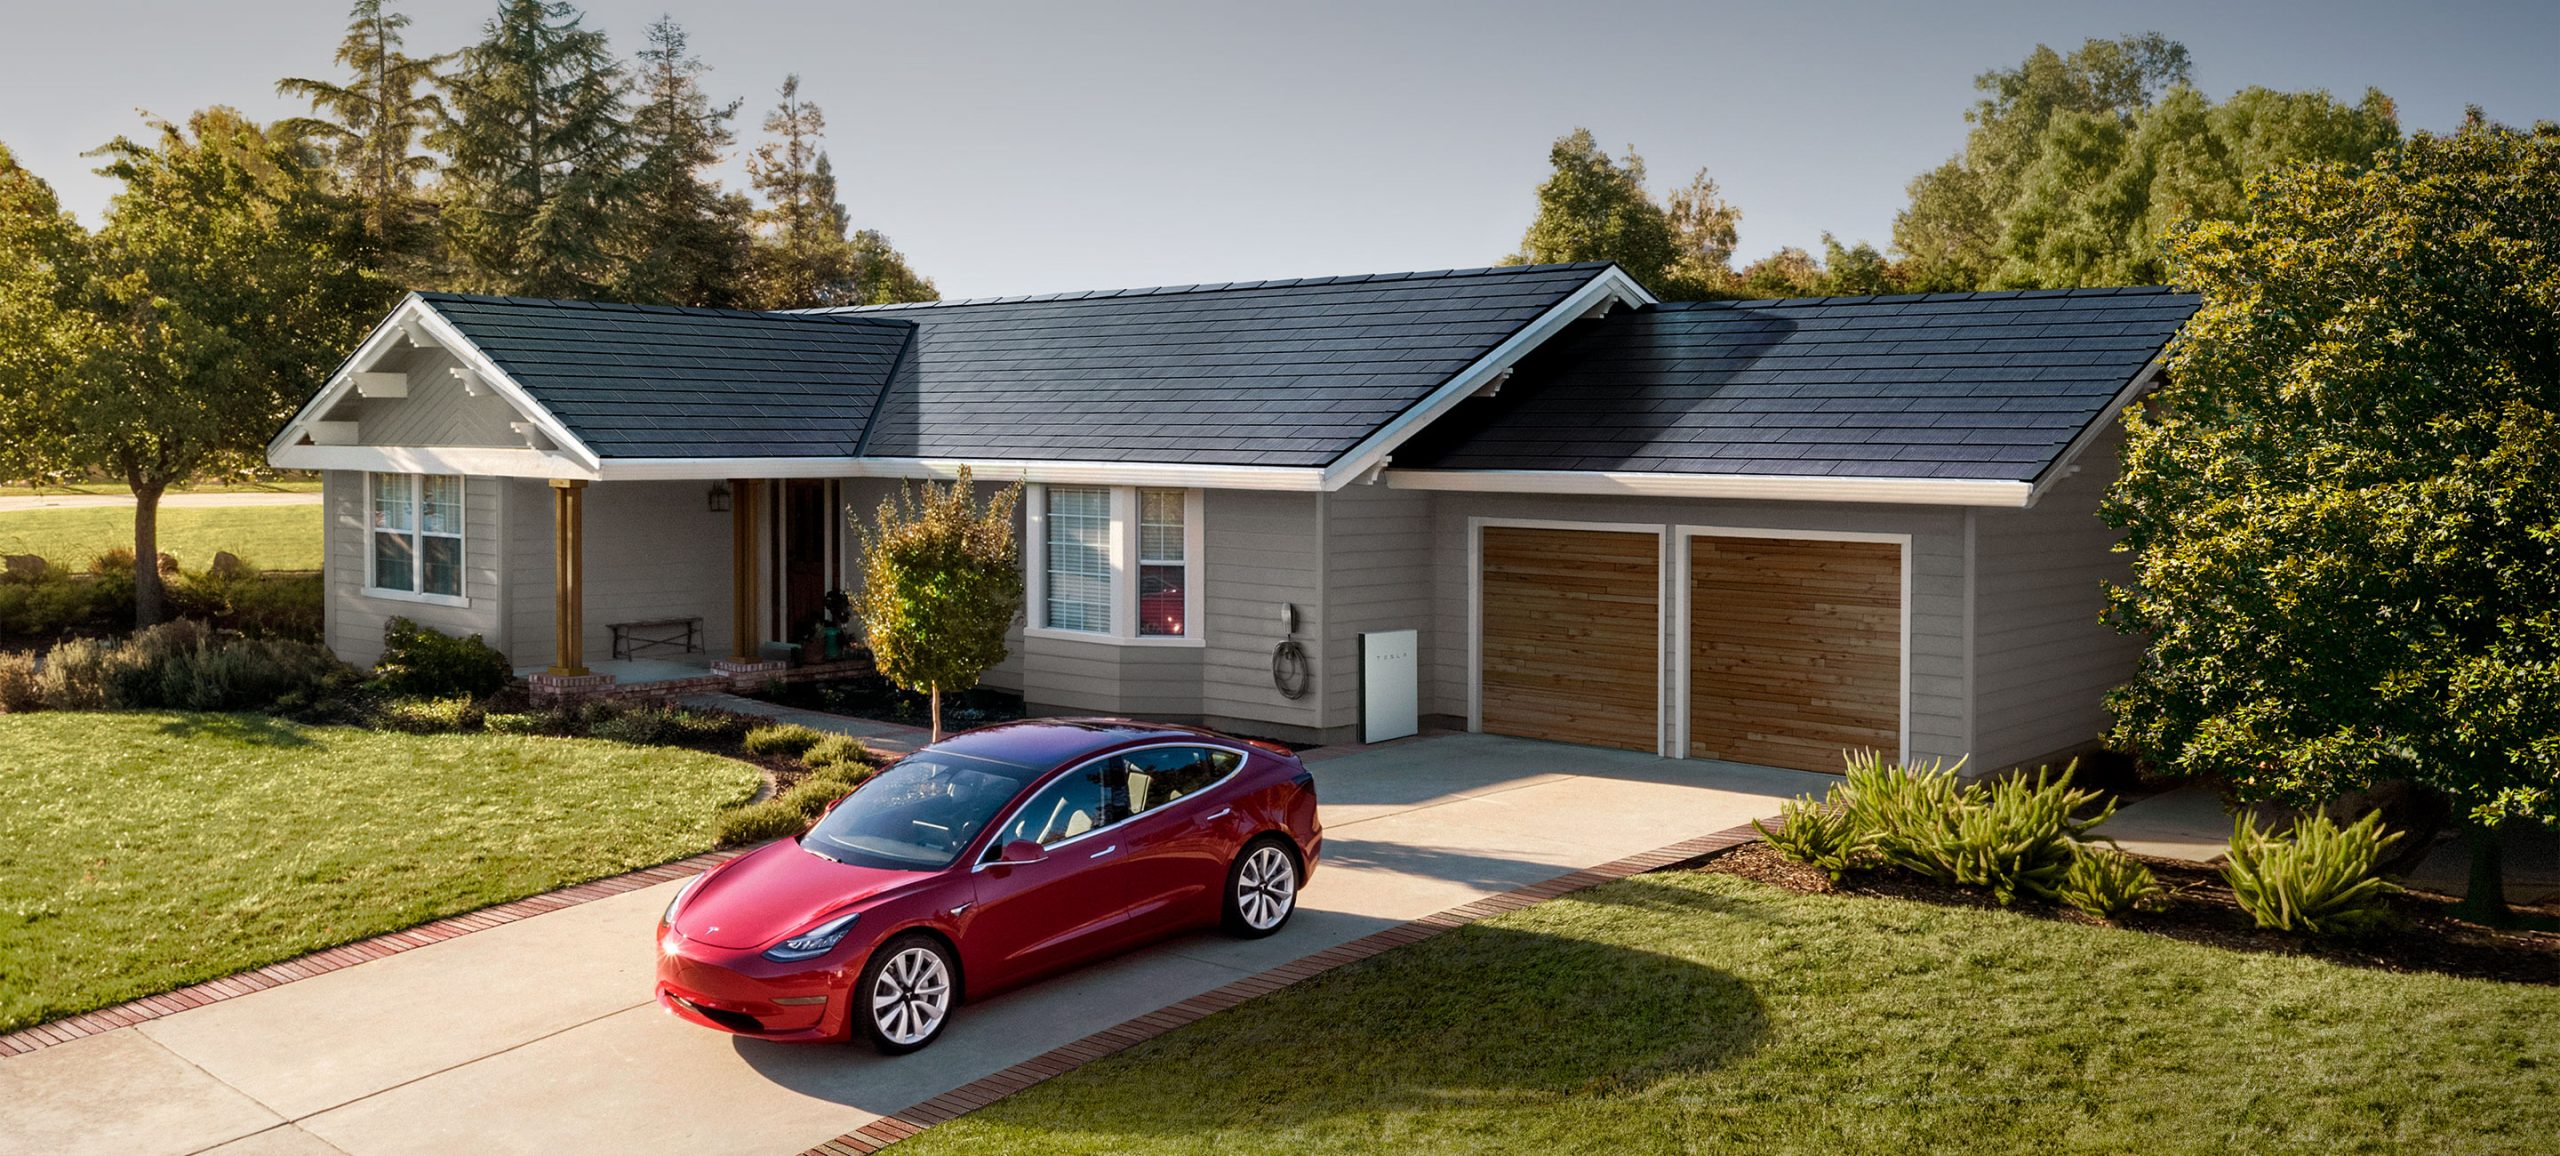 Tesla Solar Roof V3 is out! But is Tesla faking it again?